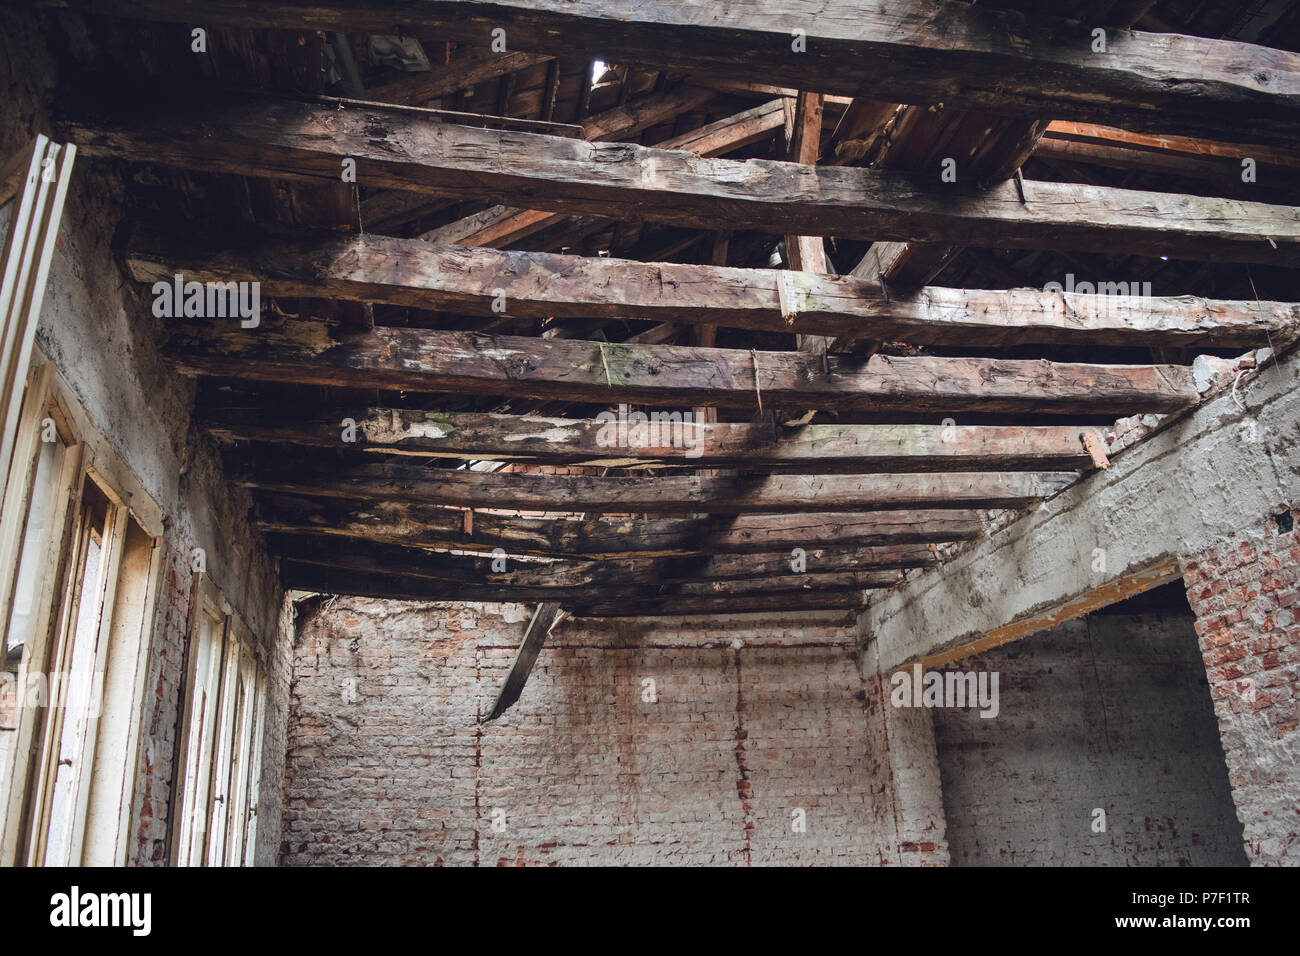 Wooden beam structure in the abandoned object. Stock Photo